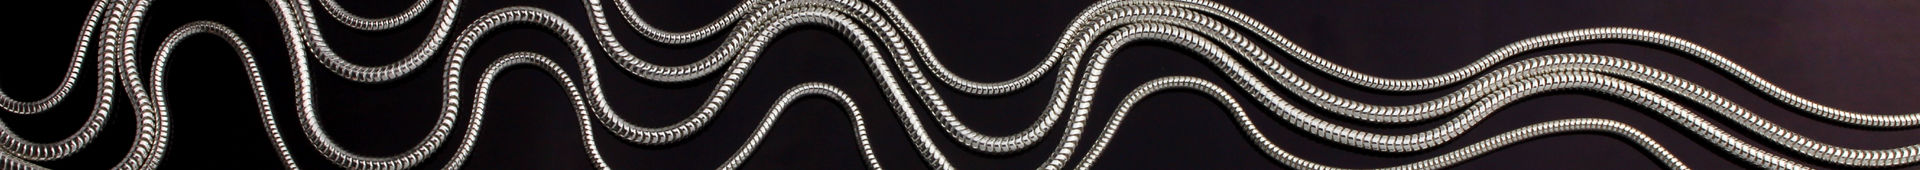 Women's Sterling Silver Snake Chain Necklaces